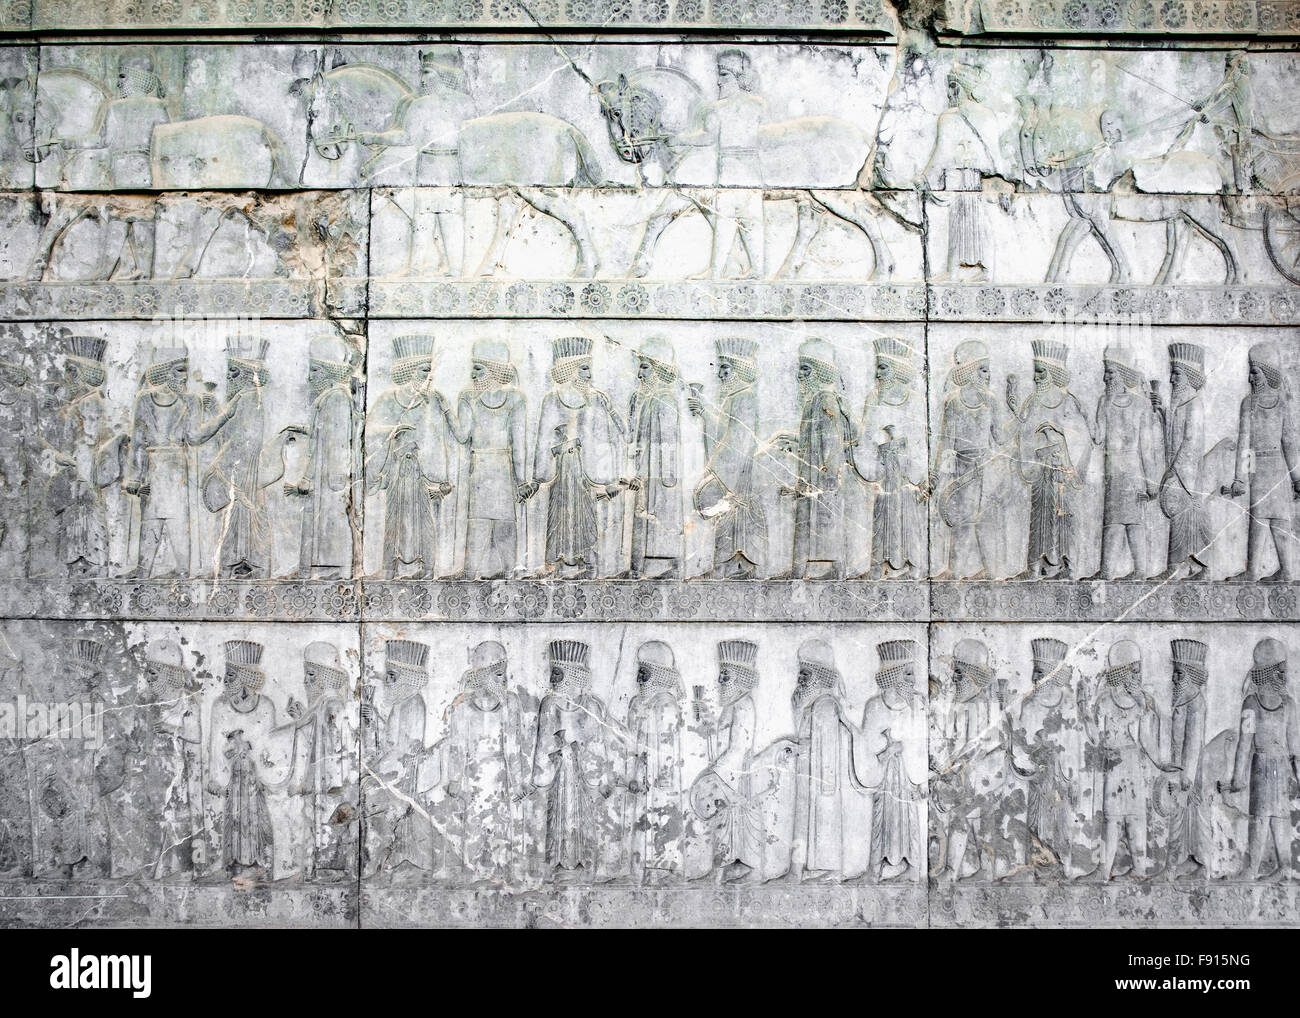 Apadana eastern staircase, Medians and Persians united in friendship, Persepolis, Iran Stock Photo